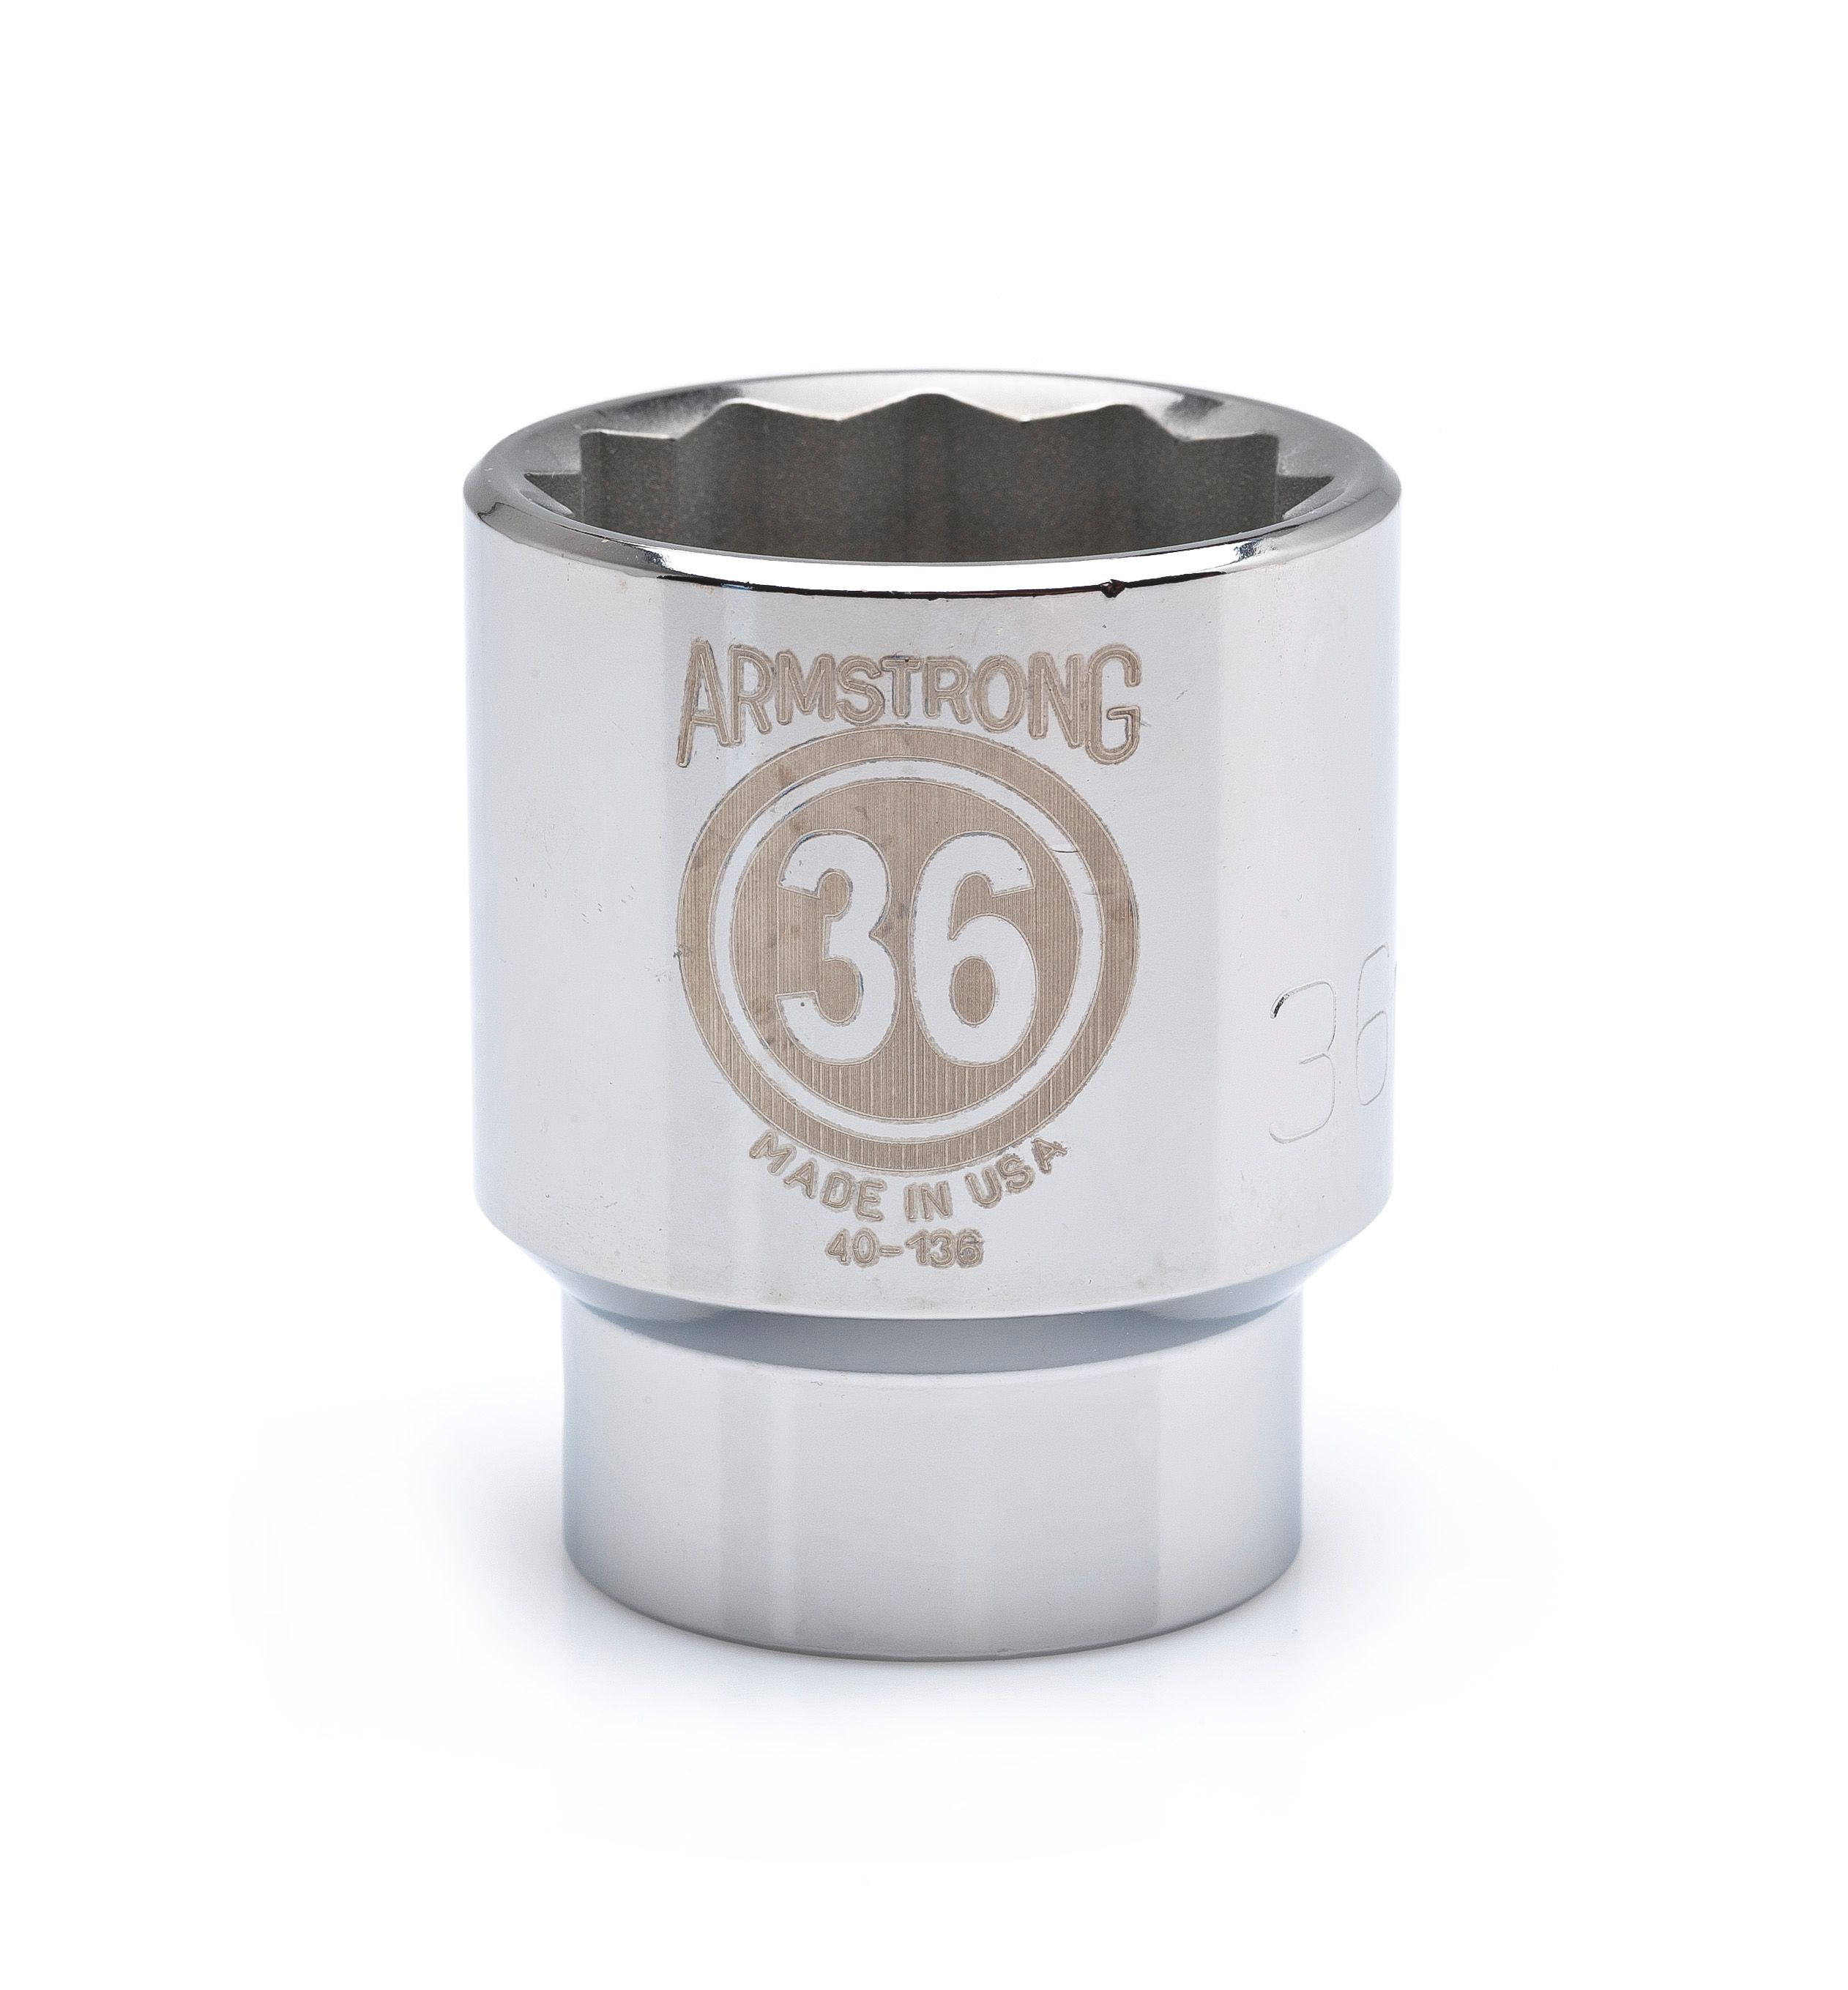 Armstrong Tools 46 mm socket, 12 pt. 3/4 in. drive